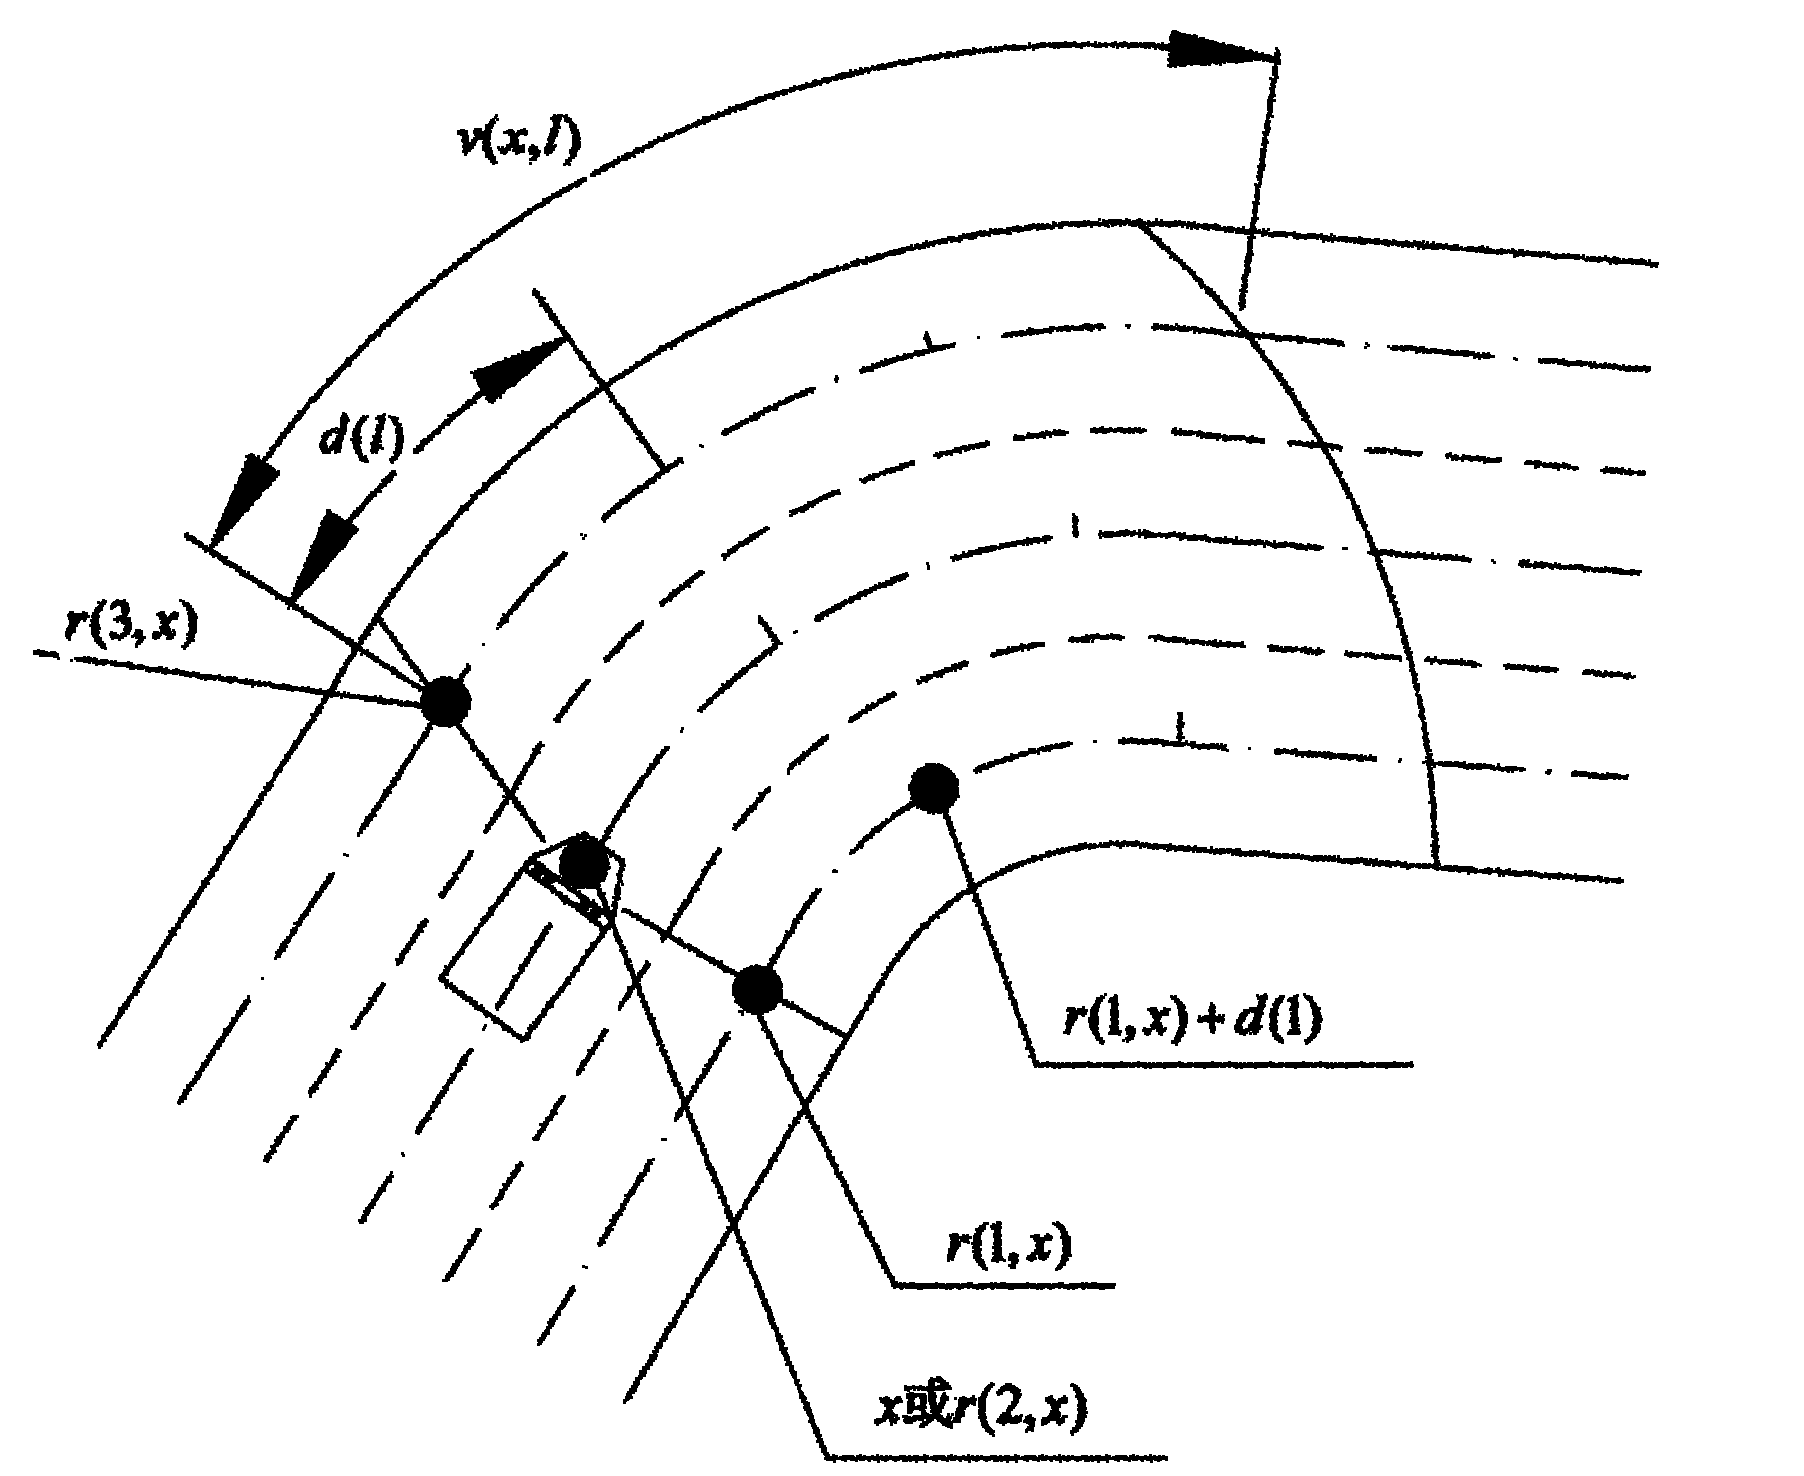 Port area bend linear design method based on ACT-R